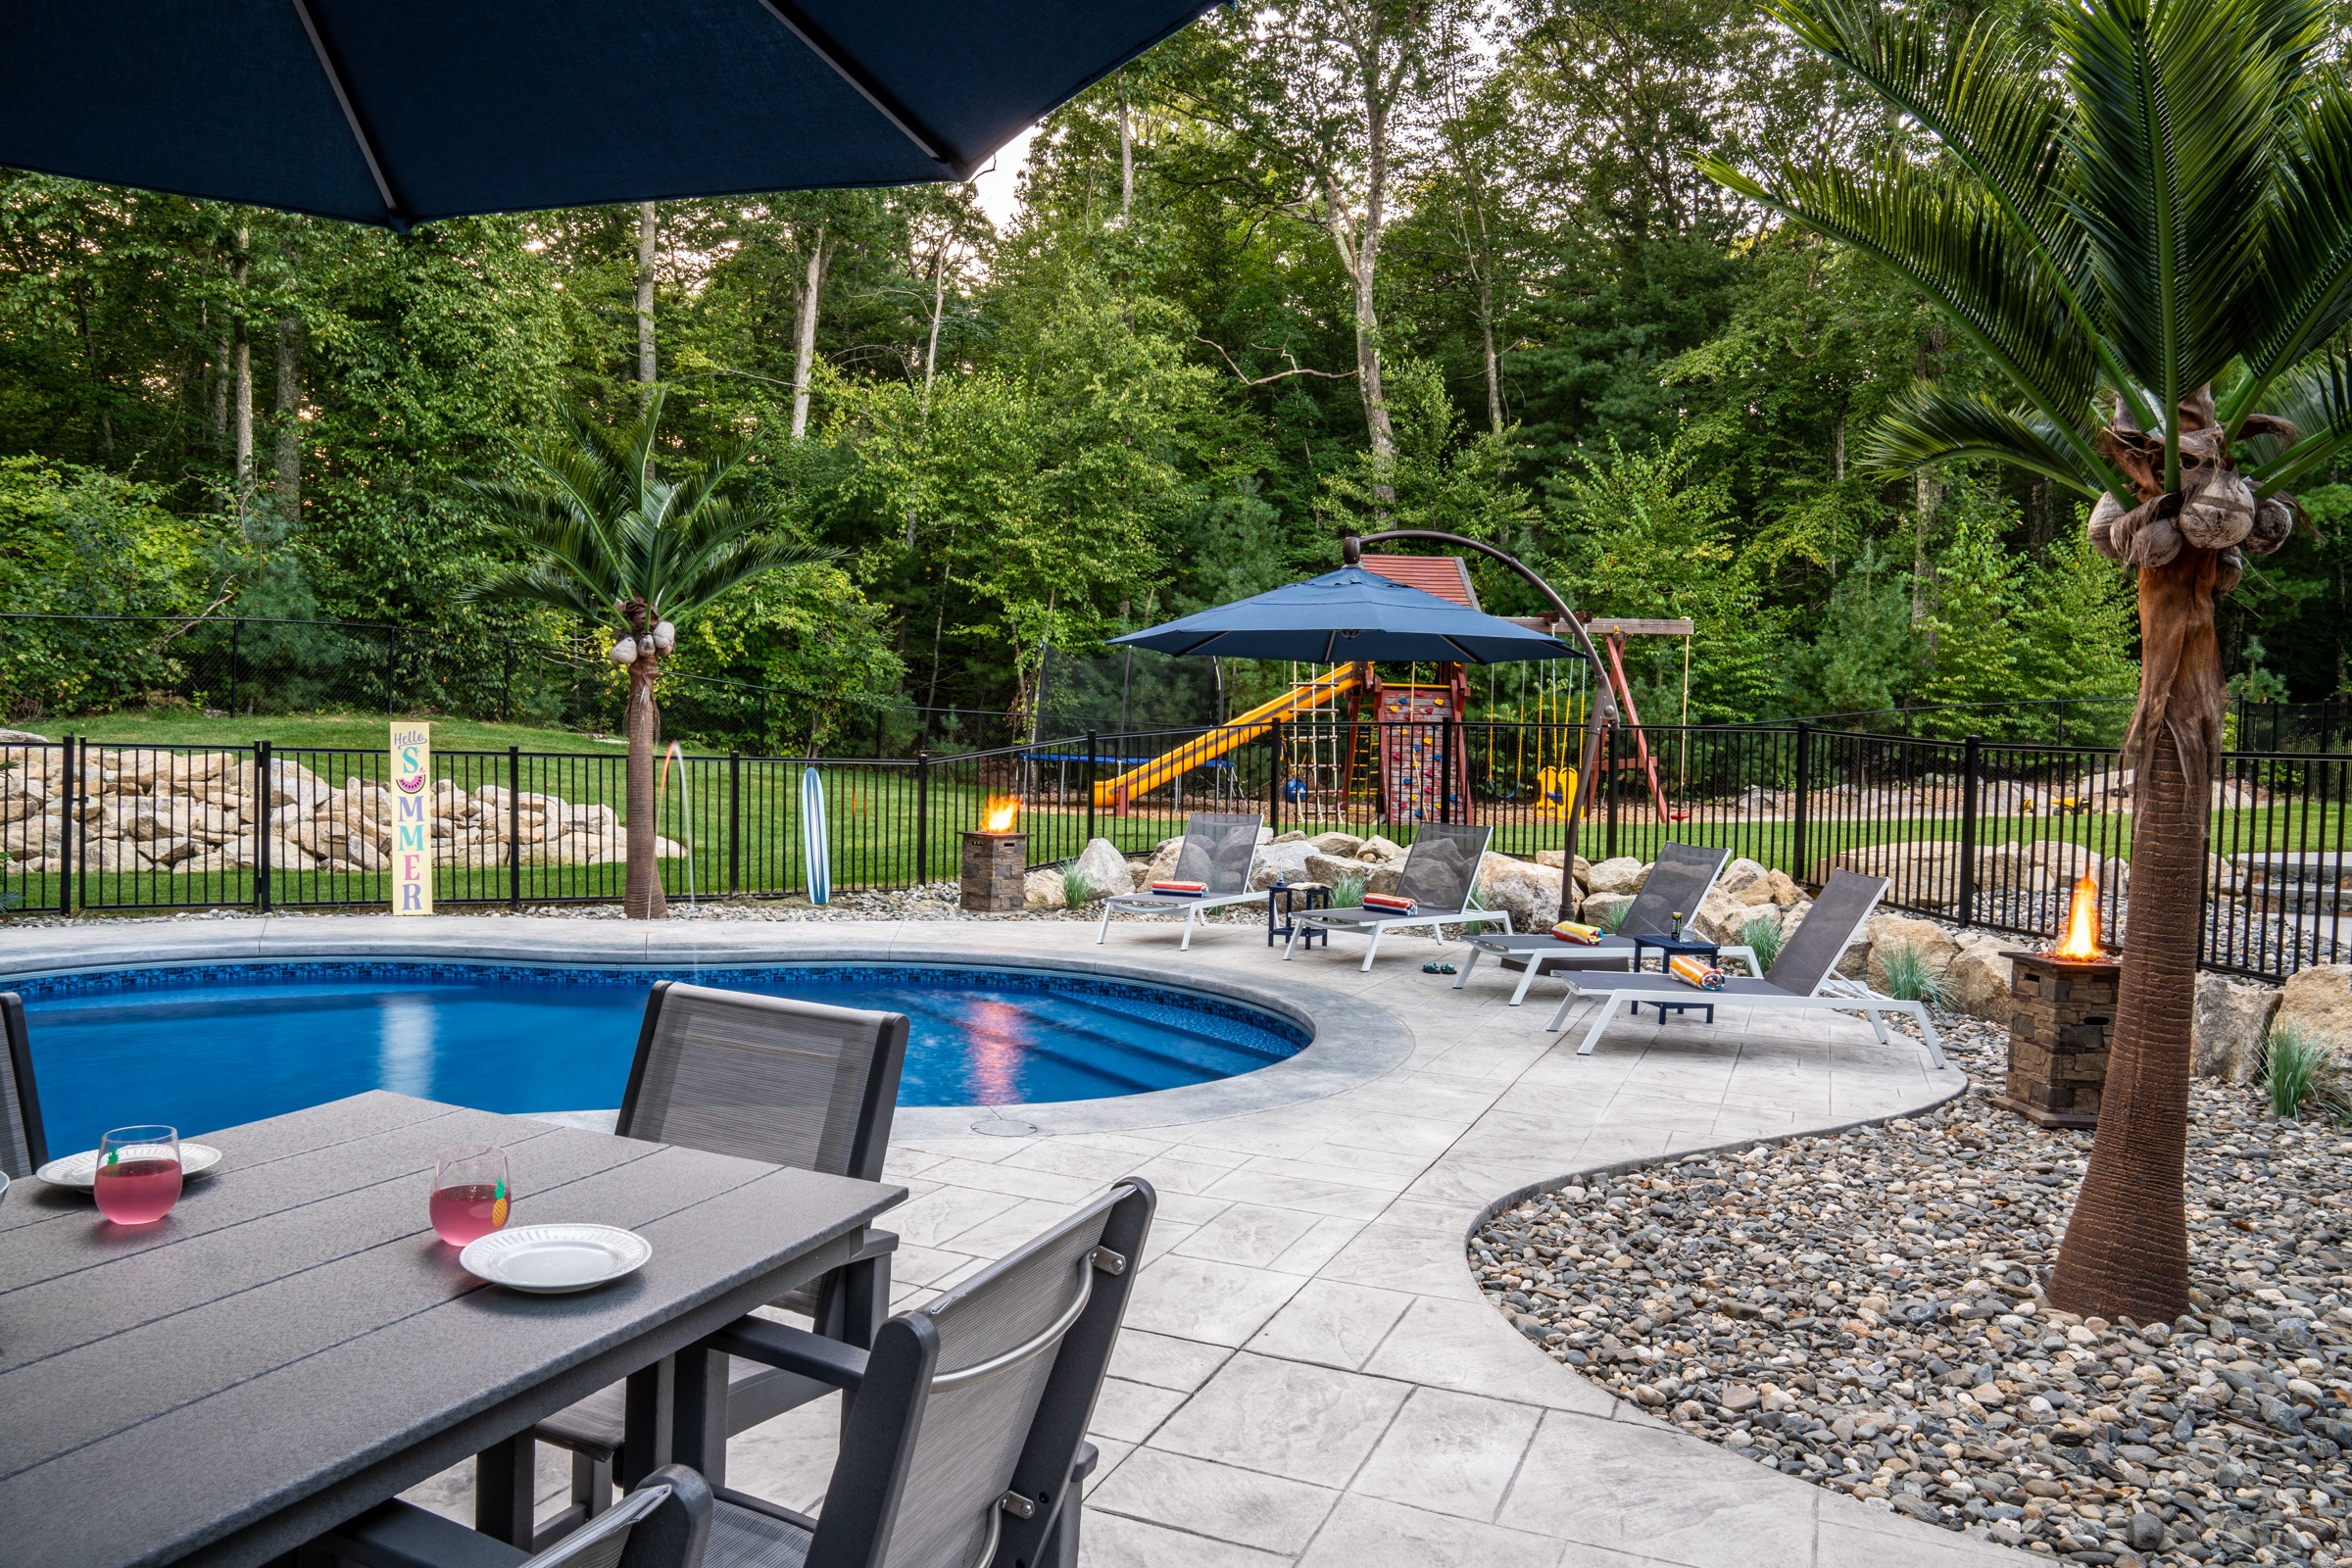 The poolside dining patio is perched atop the elevated stamped concrete pool deck at this home in Northbridge, Massachusetts.